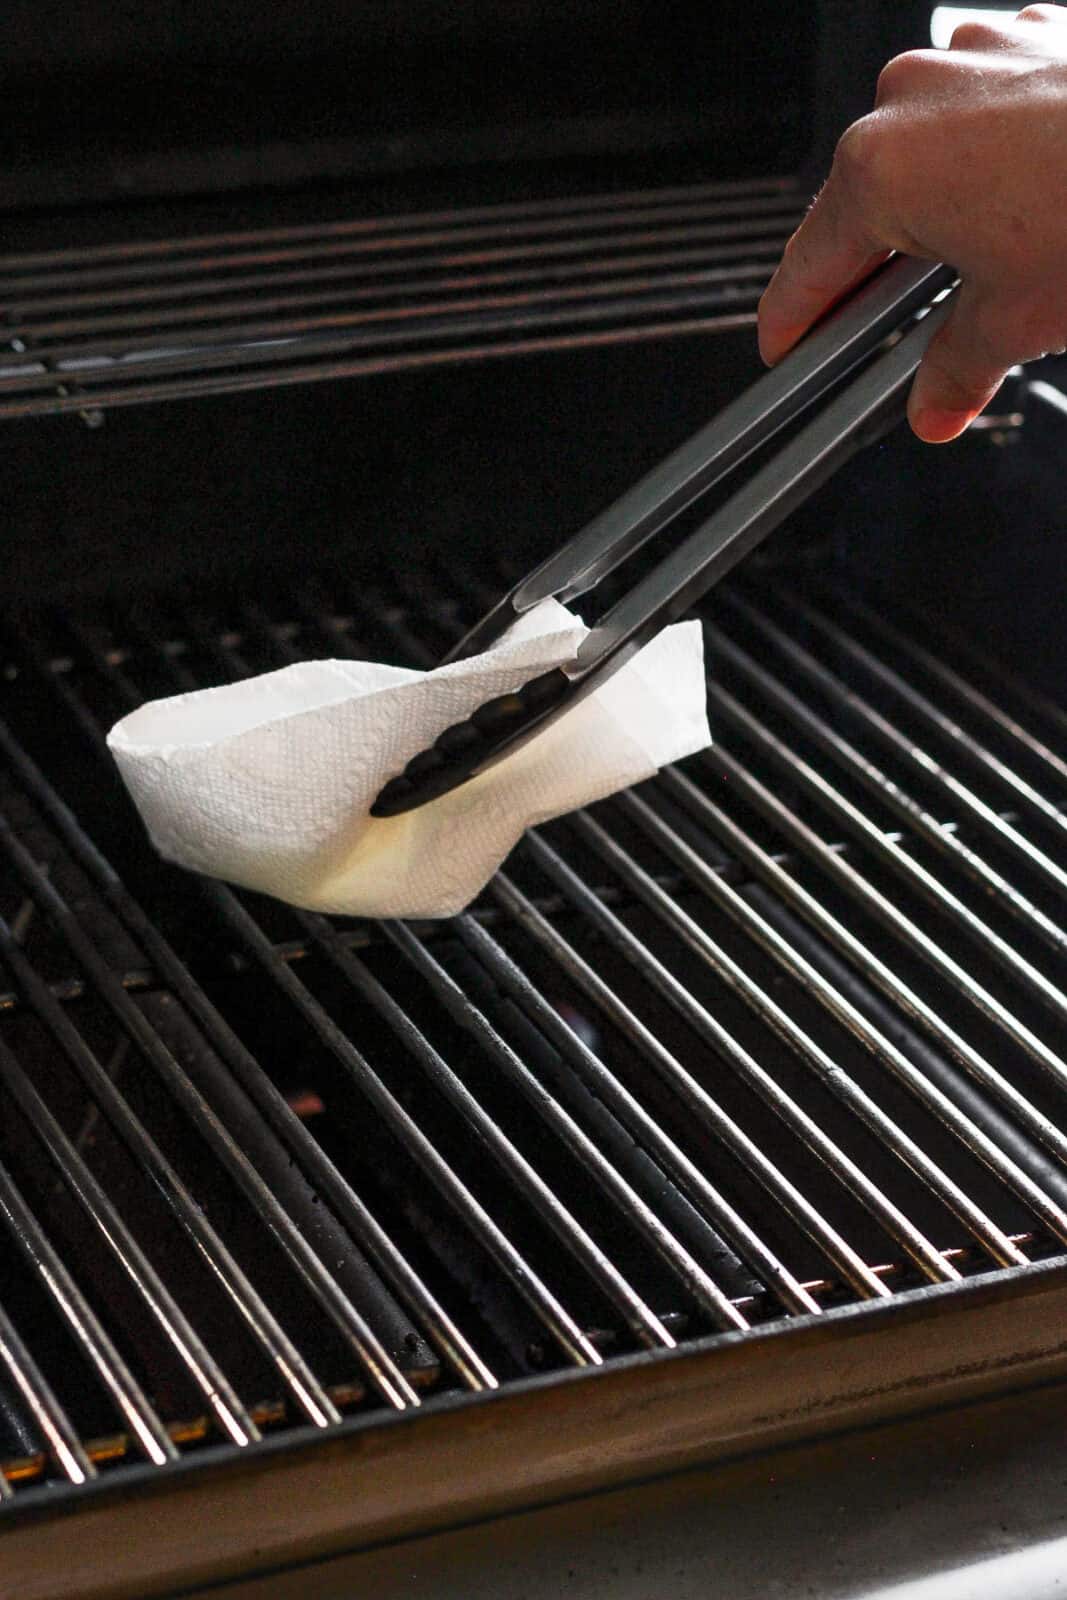 Someone rubbing an olive-oil soaked paper towel on clean grill grates with a pair of tongs.